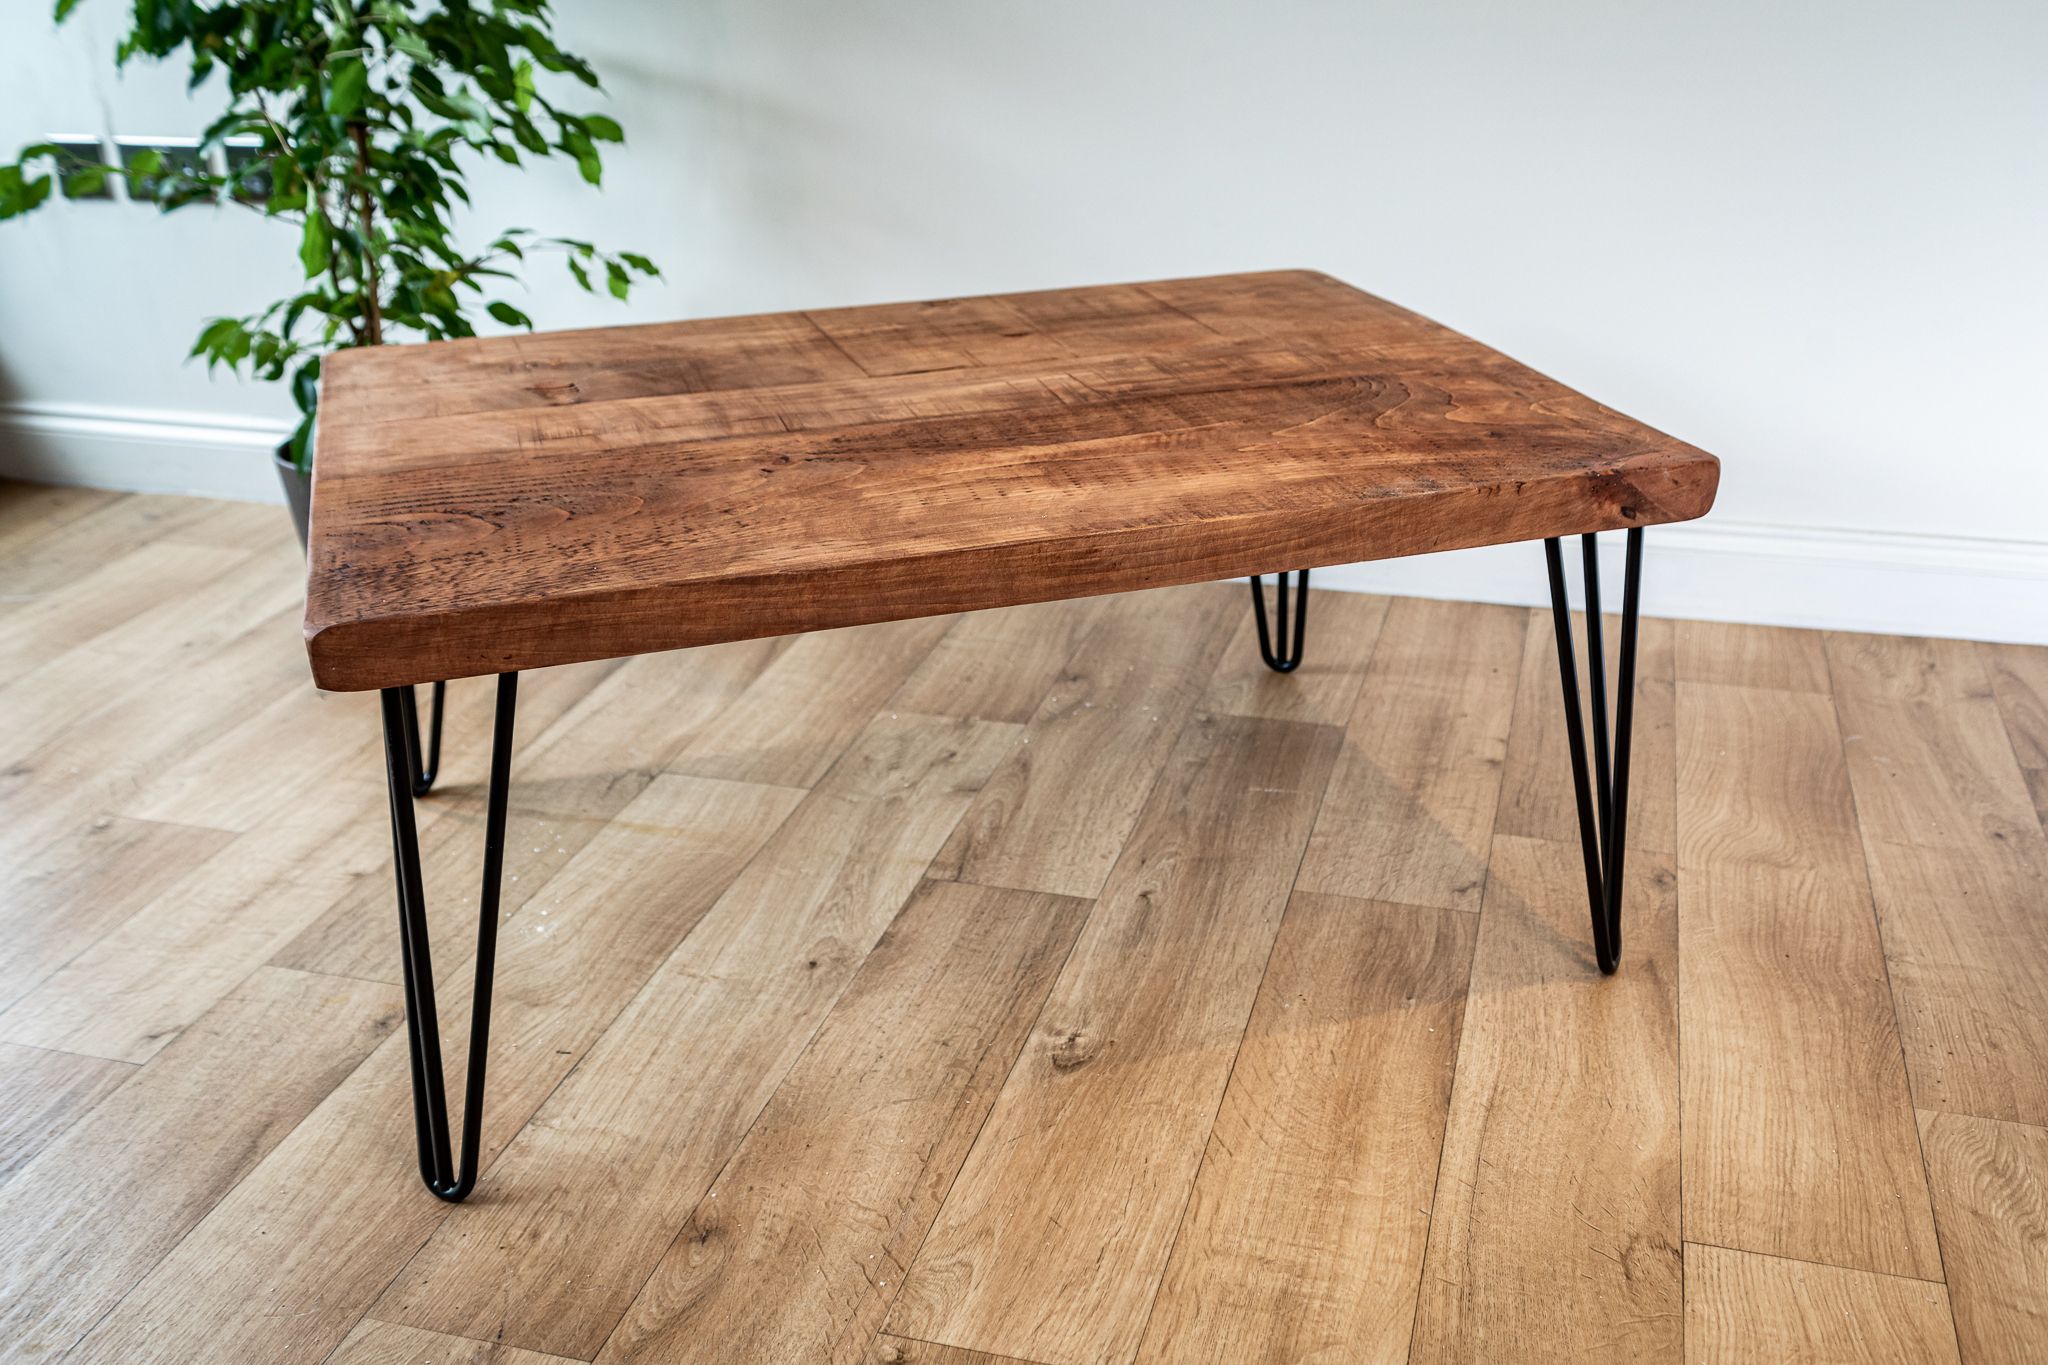 2018 Hairpin Leg Coffee Table – Rustic Reclaimed Plank Wood Top Inside Reclaimed Wood Coffee Tables (View 7 of 20)